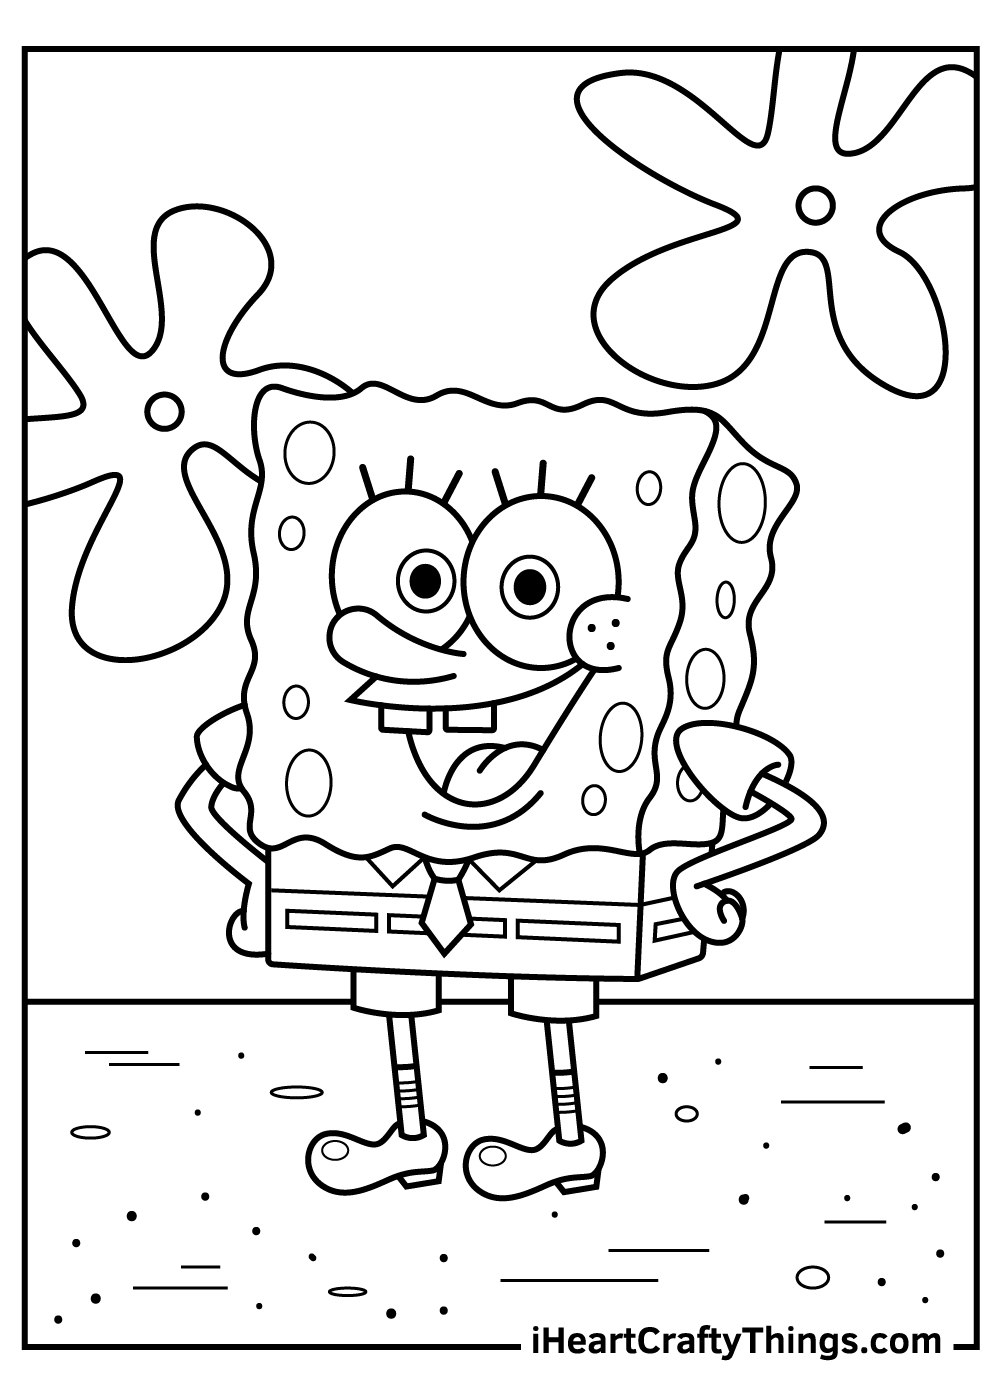 Cute Spongebob Coloring Pages Updated 20